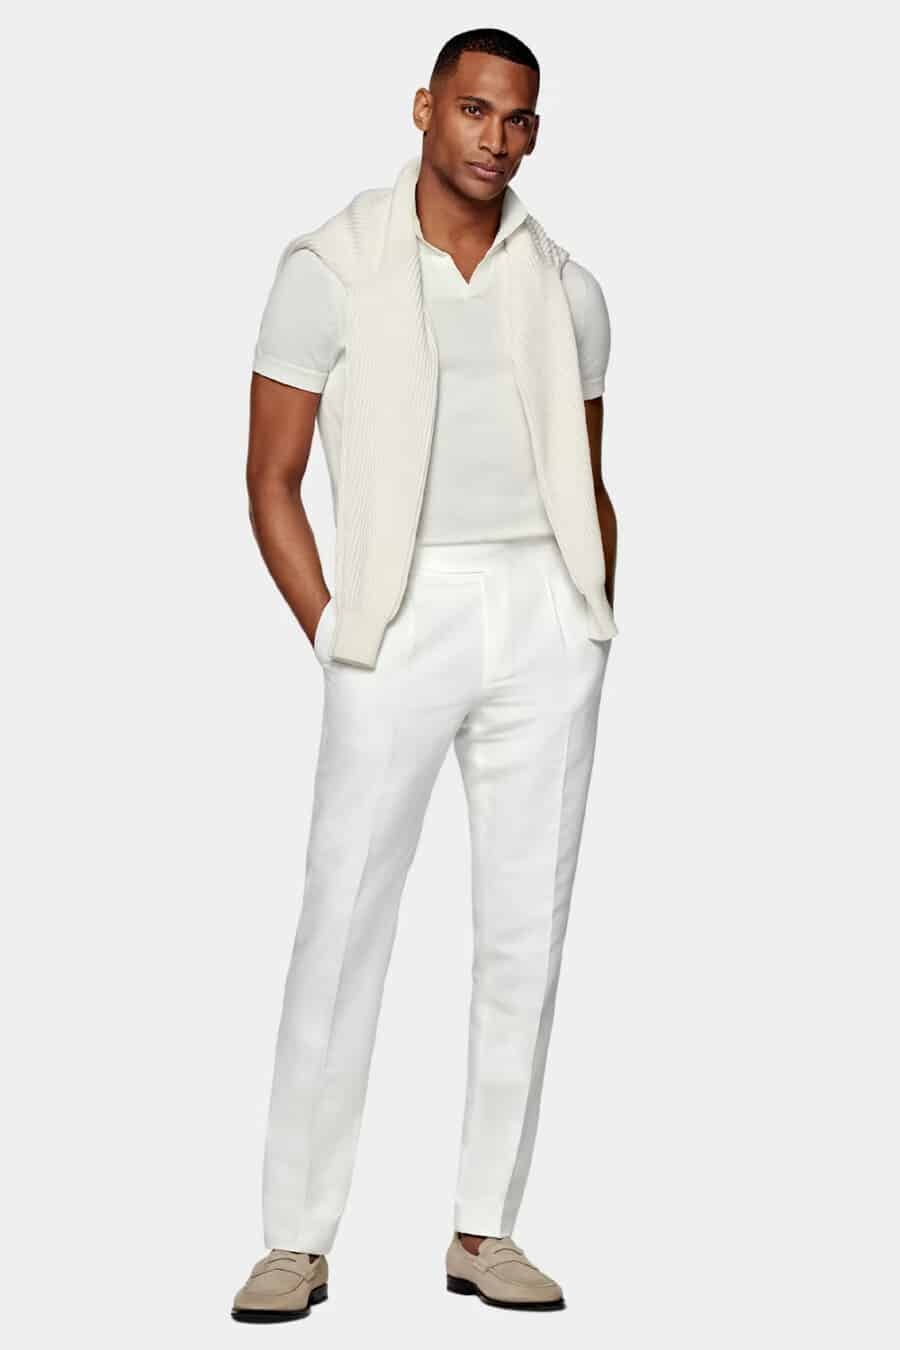 mens-all-white-outfit-polo-900x1350.jpg